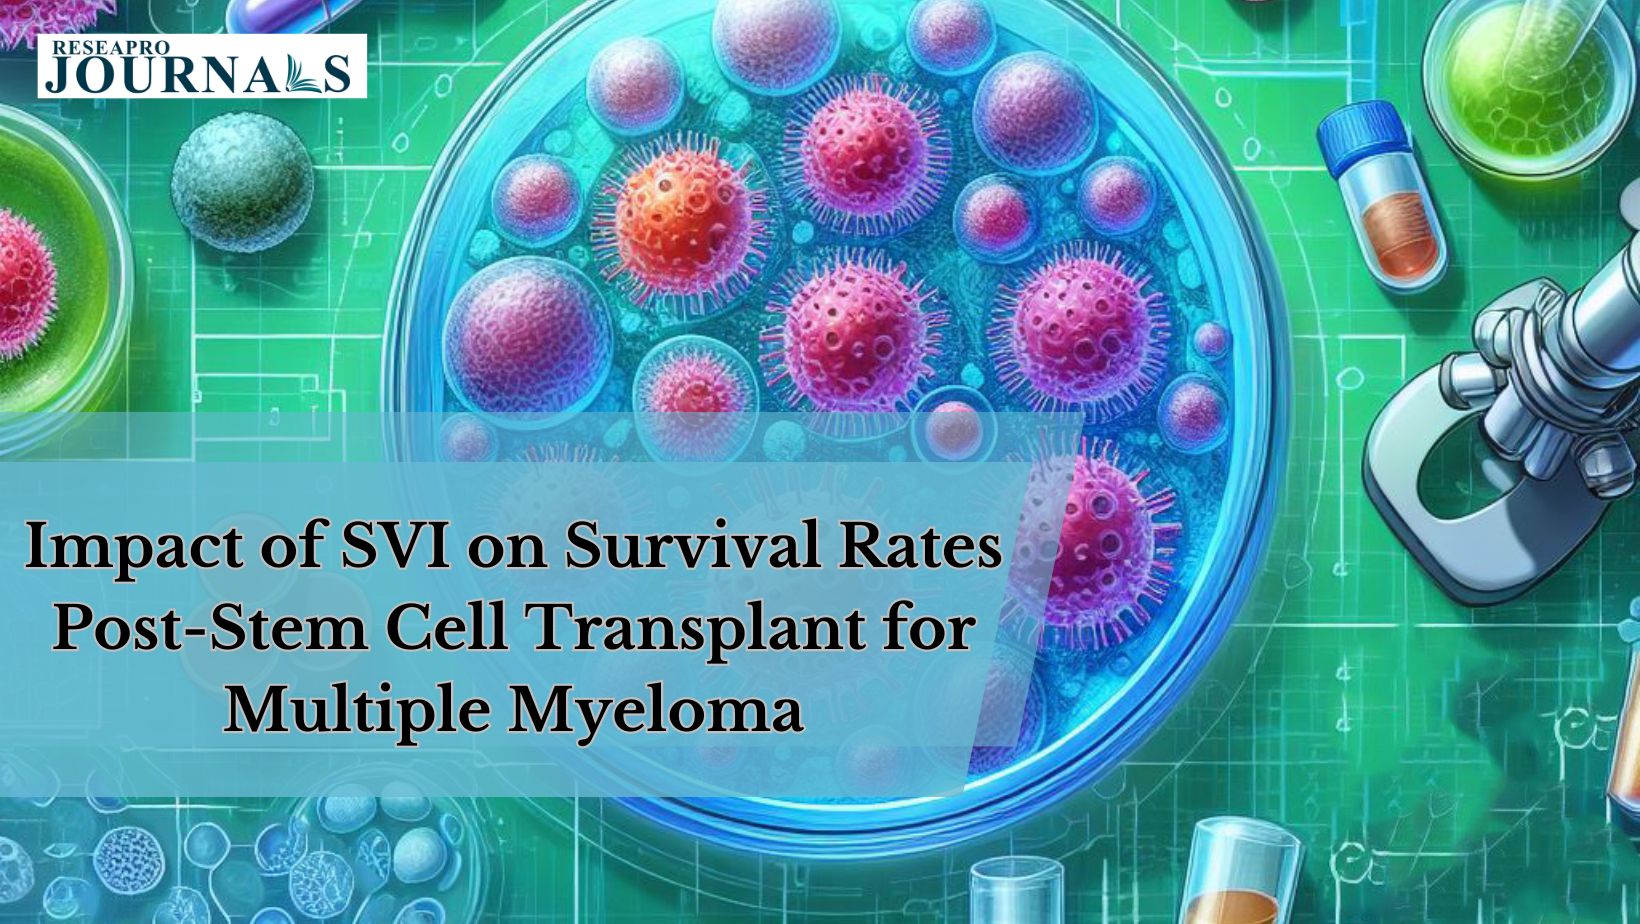 Impact of Social Vulnerability Index on Survival Rates Post-Stem Cell Transplant for Multiple Myeloma